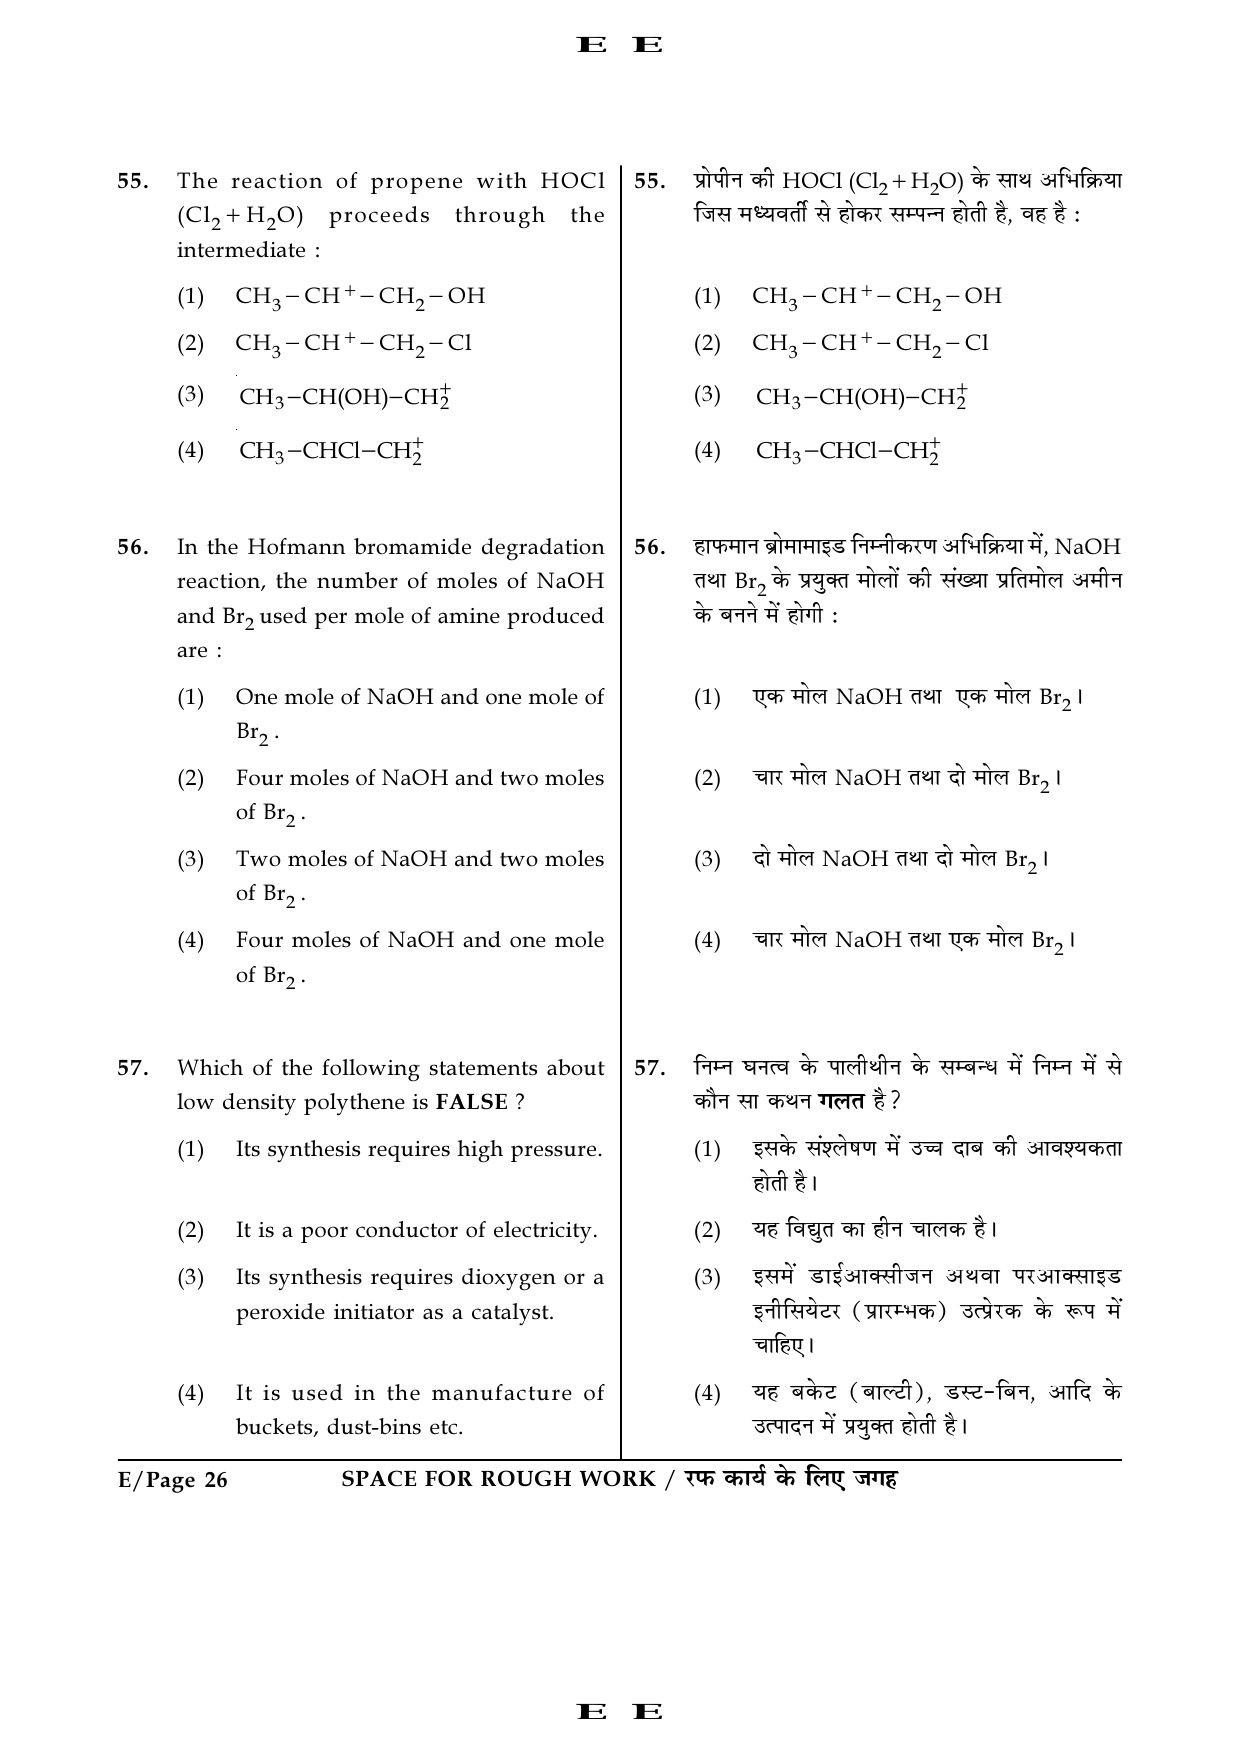 JEE Main Exam Question Paper 2016 Booklet E 26